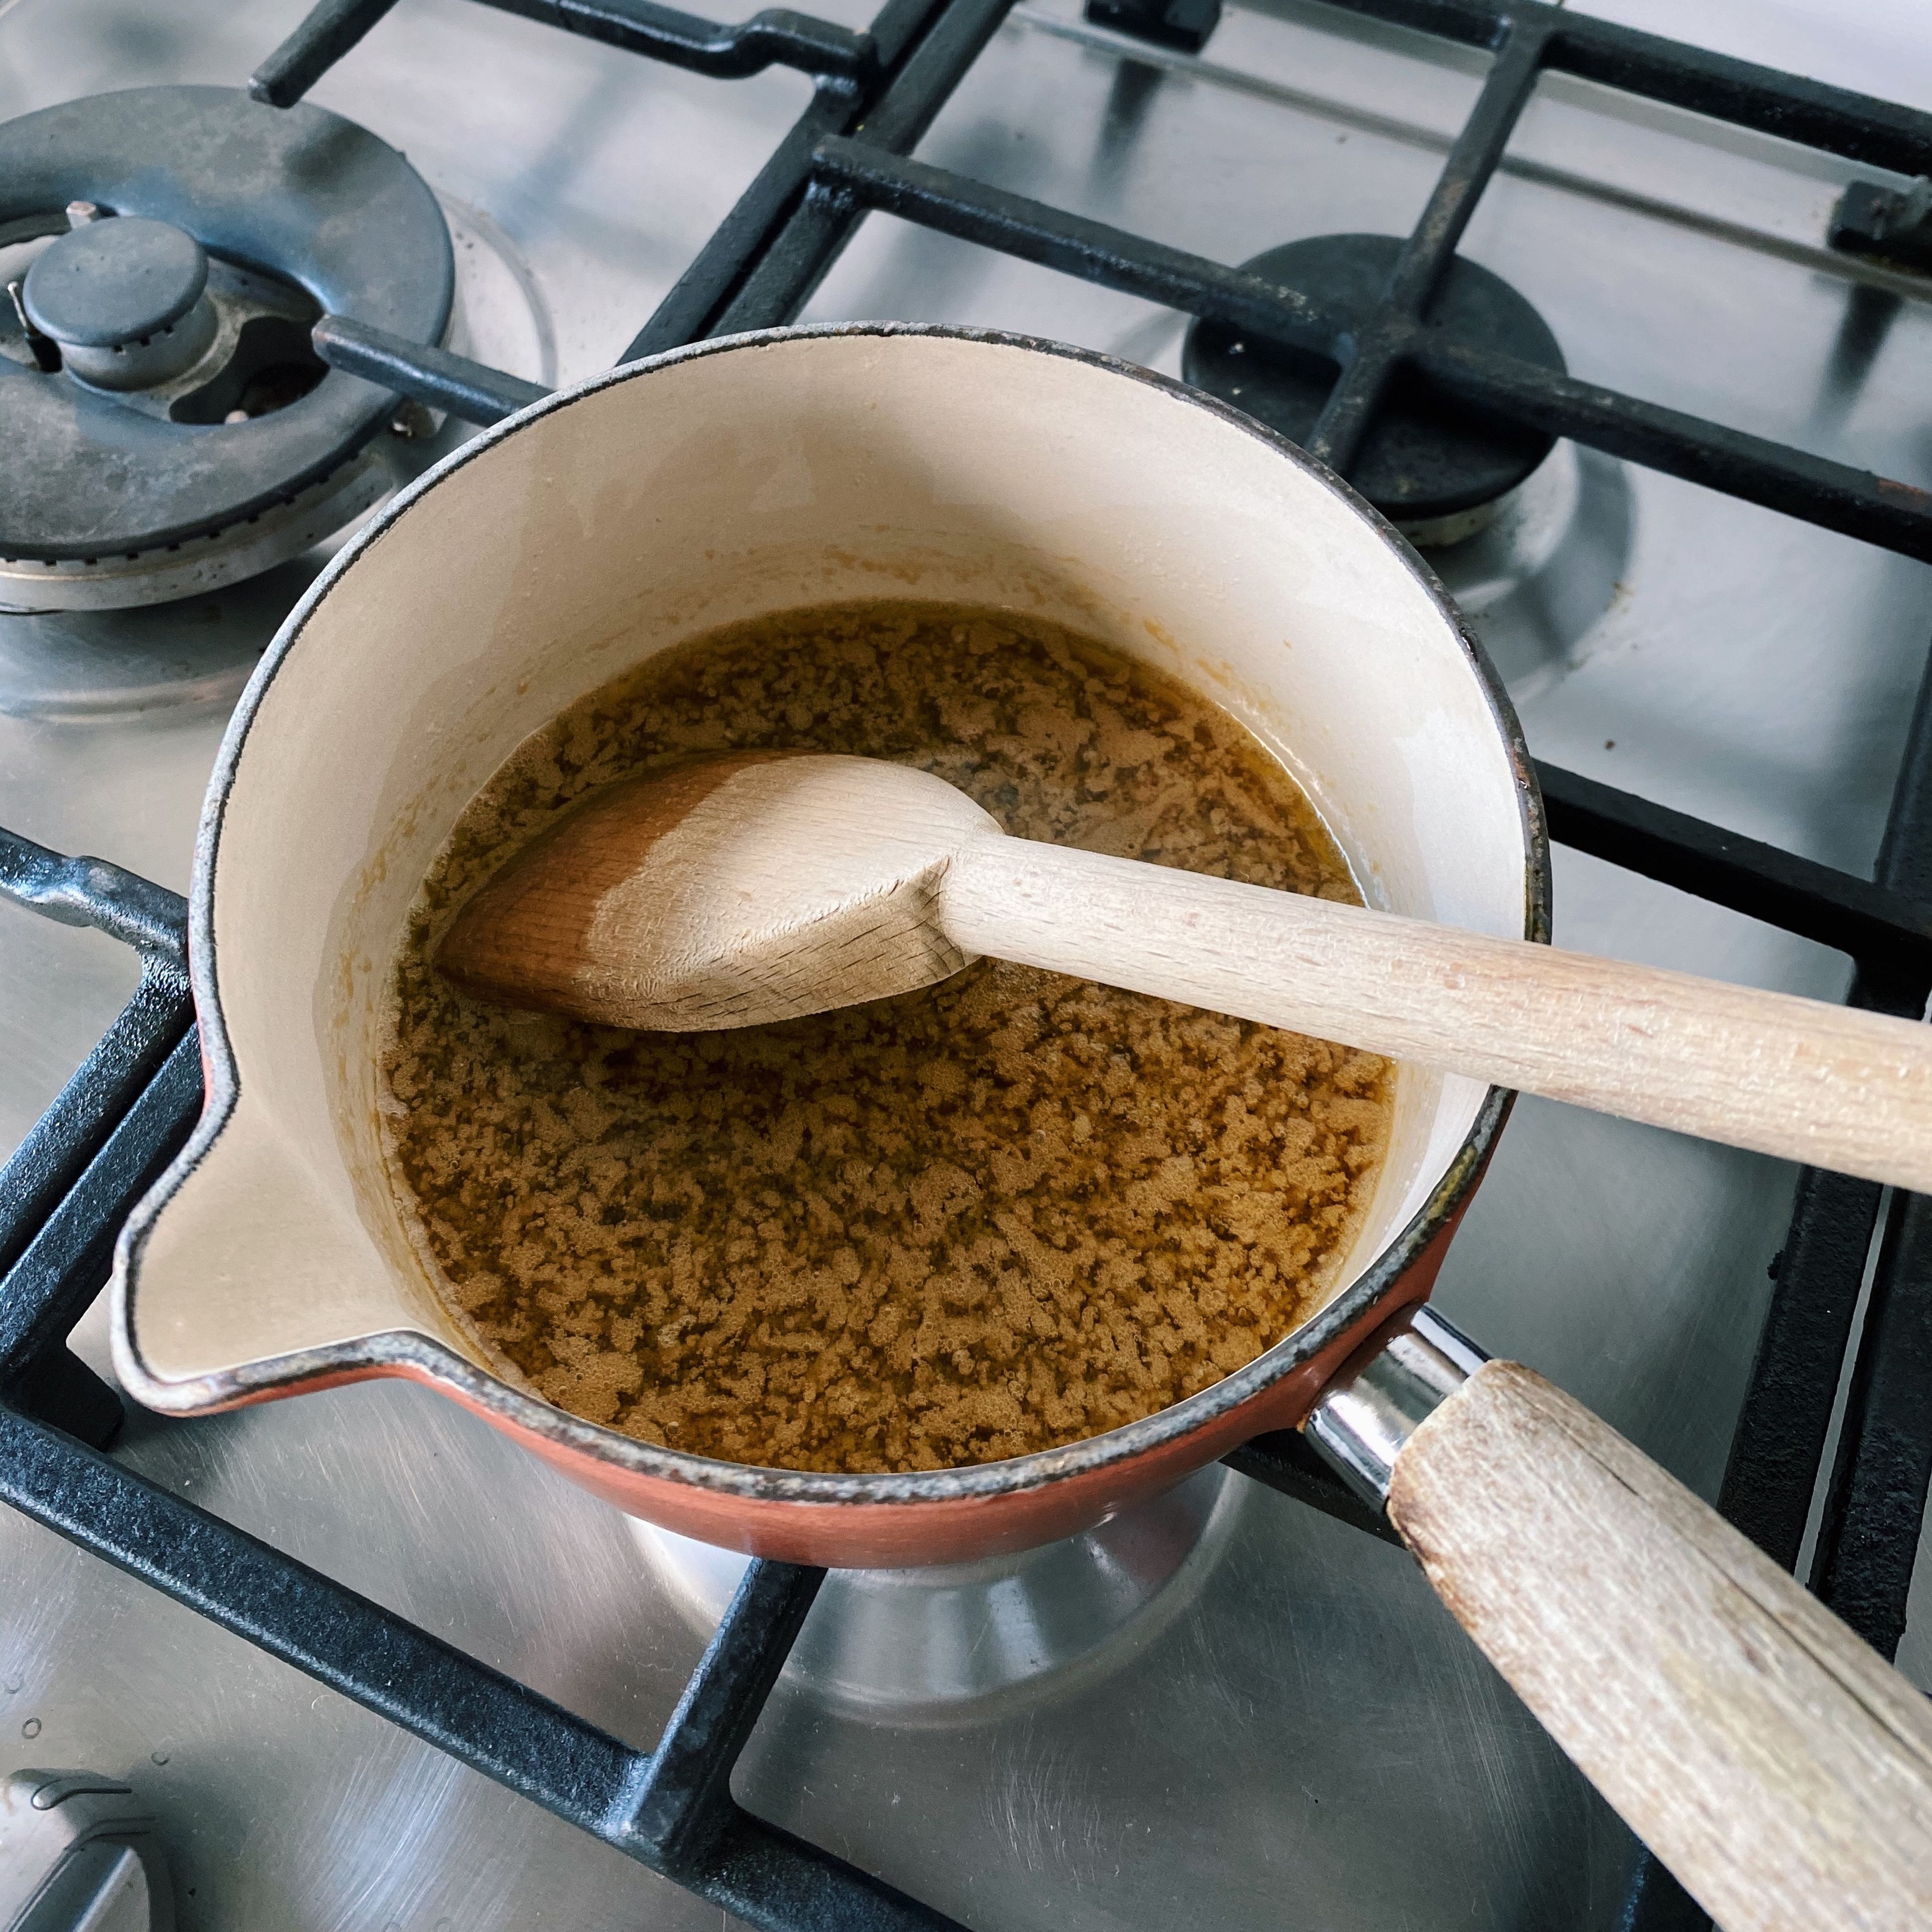 In a small/medium-sized pan, combine butter, golden syrup and sugars. Stir with a wooden spoon over a low heat until butter is melted.